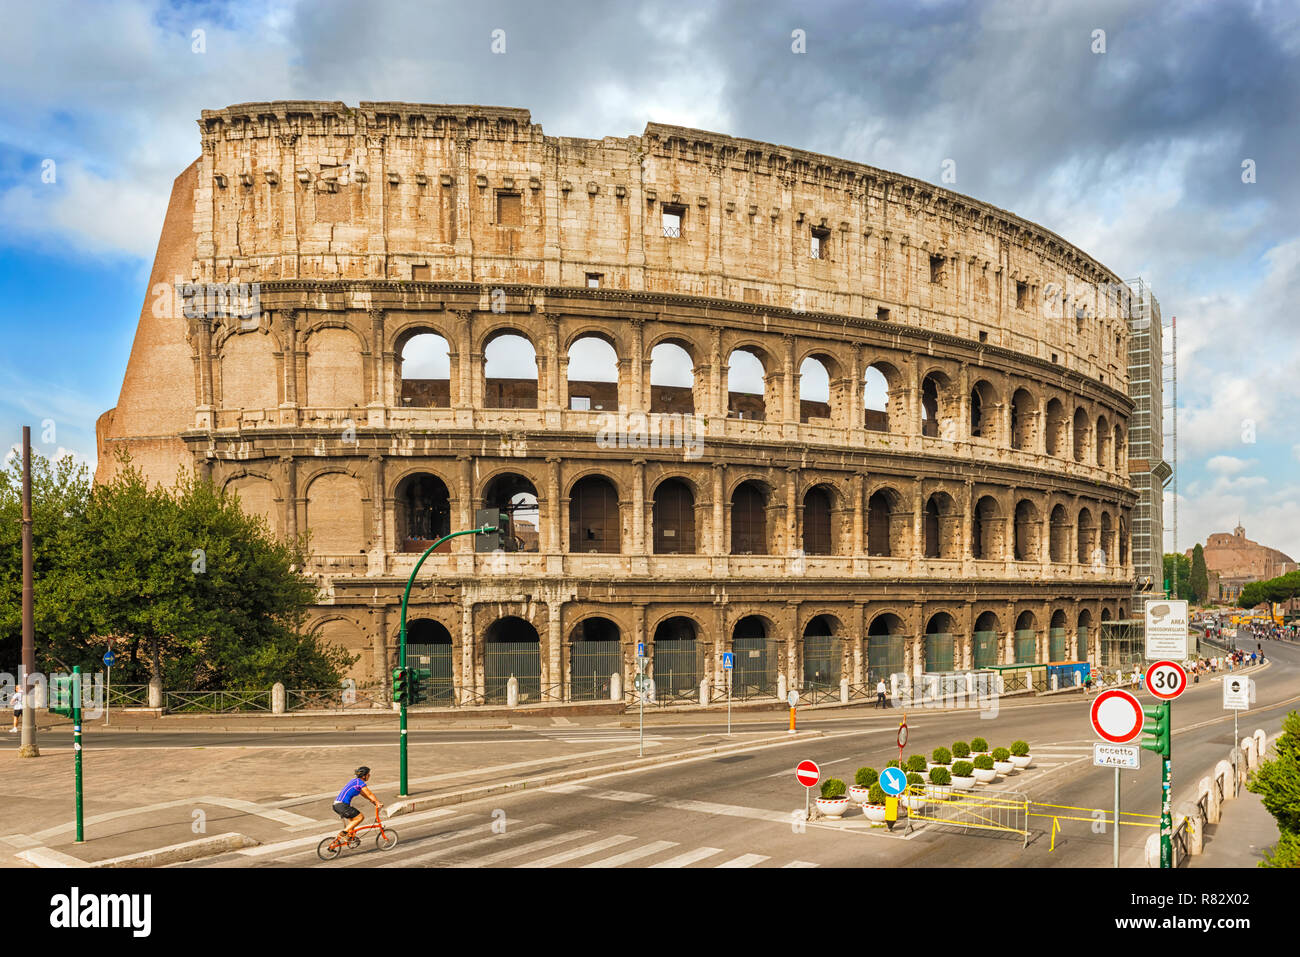 Rome, Italy - September 1, 2014: Part of the Flavian Amphitheatre known as the Coliseum. it is one of the main tourist attractions of the city of Rome Stock Photo